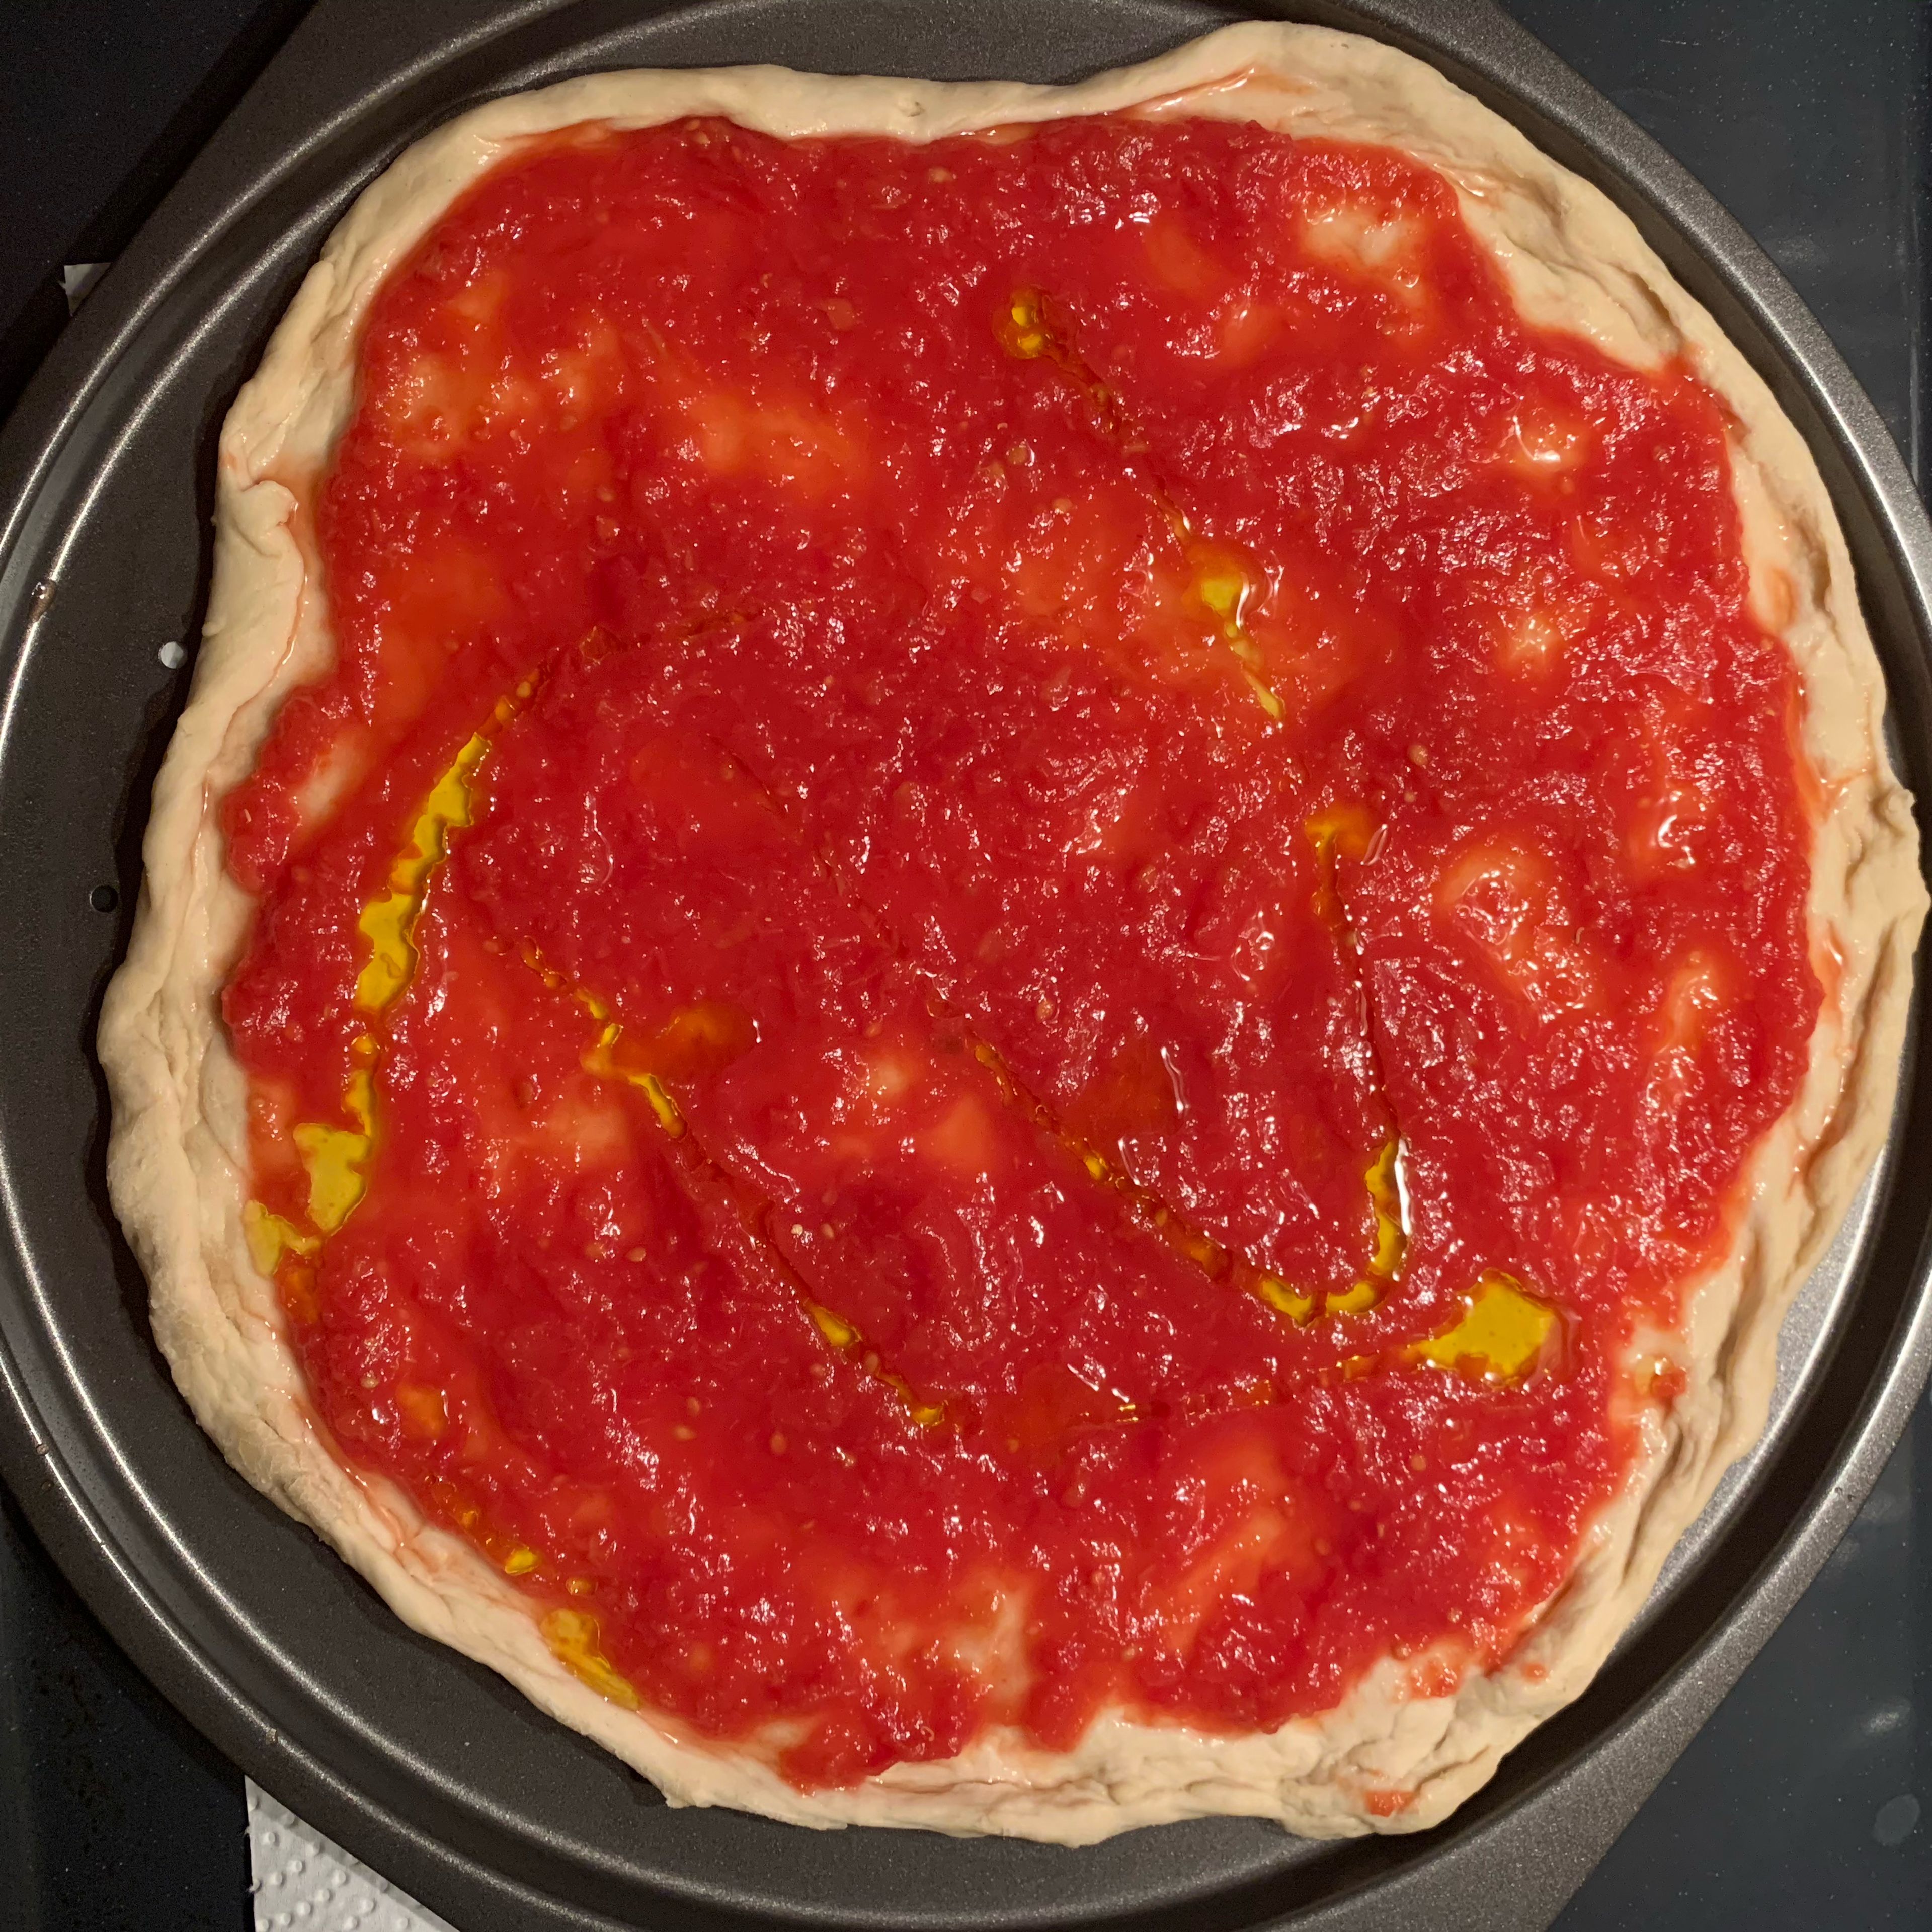 Then add tomato sauce and a bit of olive oil. Bake at 250 degrees for 10 minutes. 